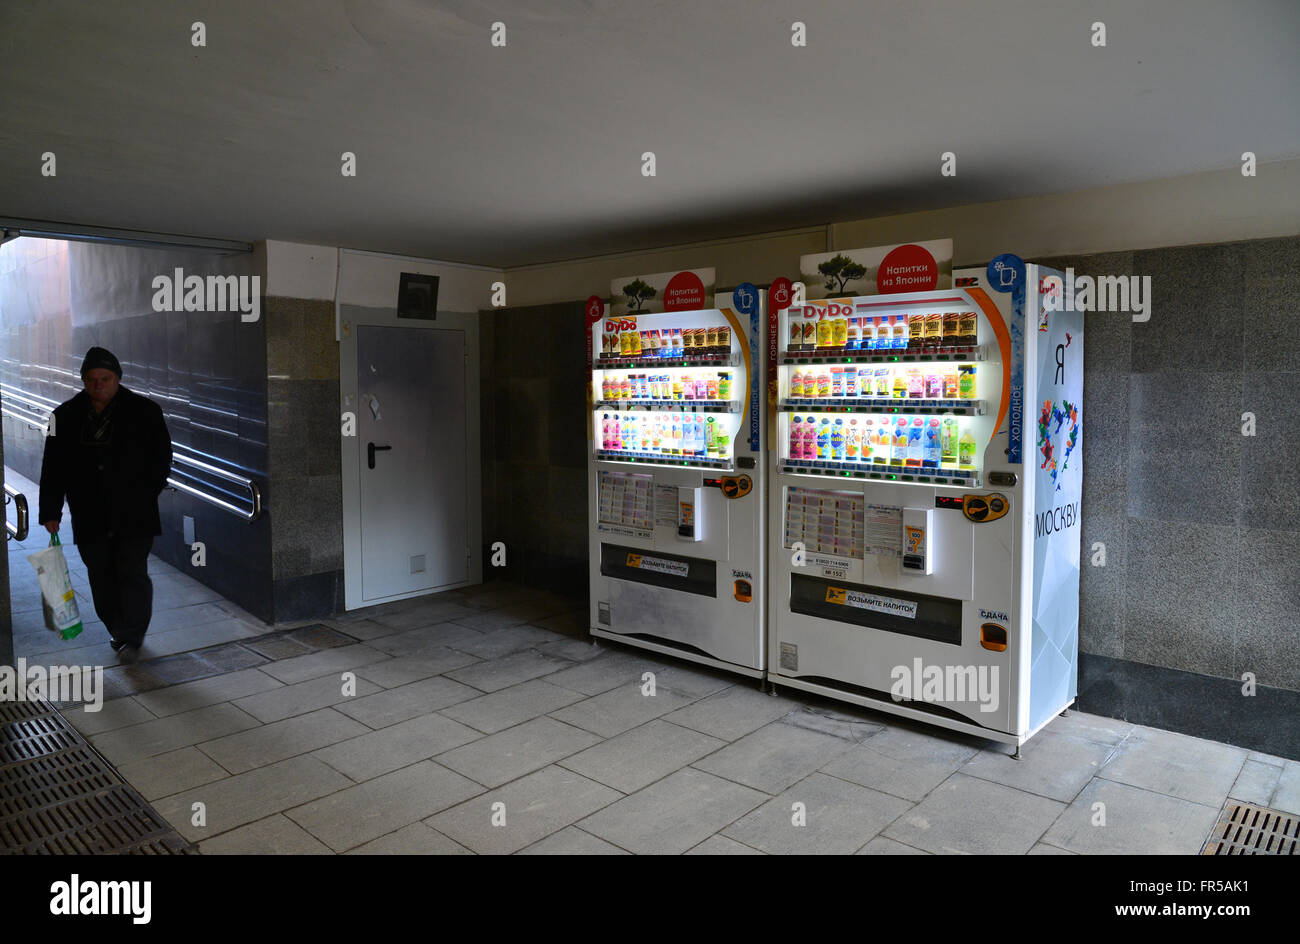 Moscow, Russia - March 14, 2016. Vending machines Japanese companies DyDo for drinks in  underpass Stock Photo